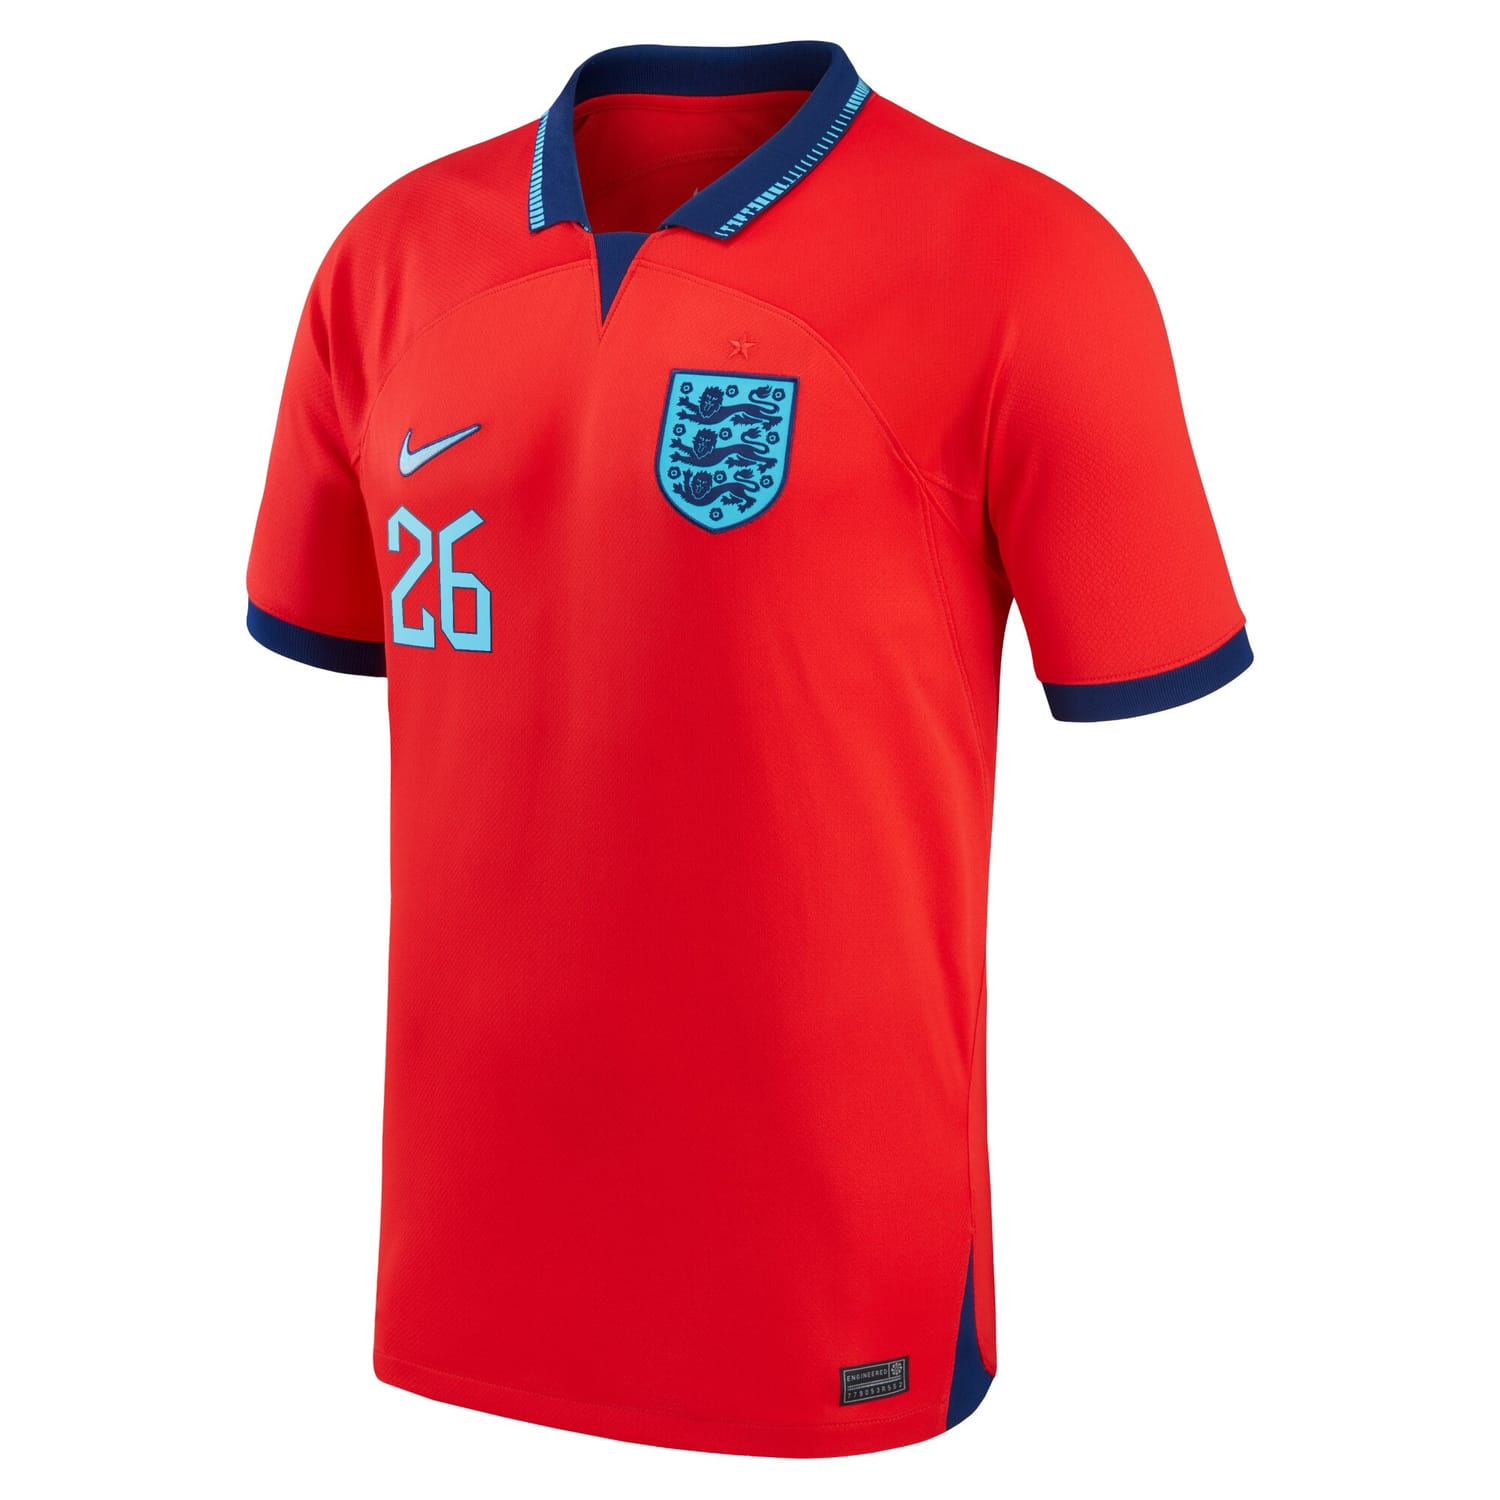 England National Team Away Jersey Shirt 2022 player Conor Gallagher 26 printing for Men